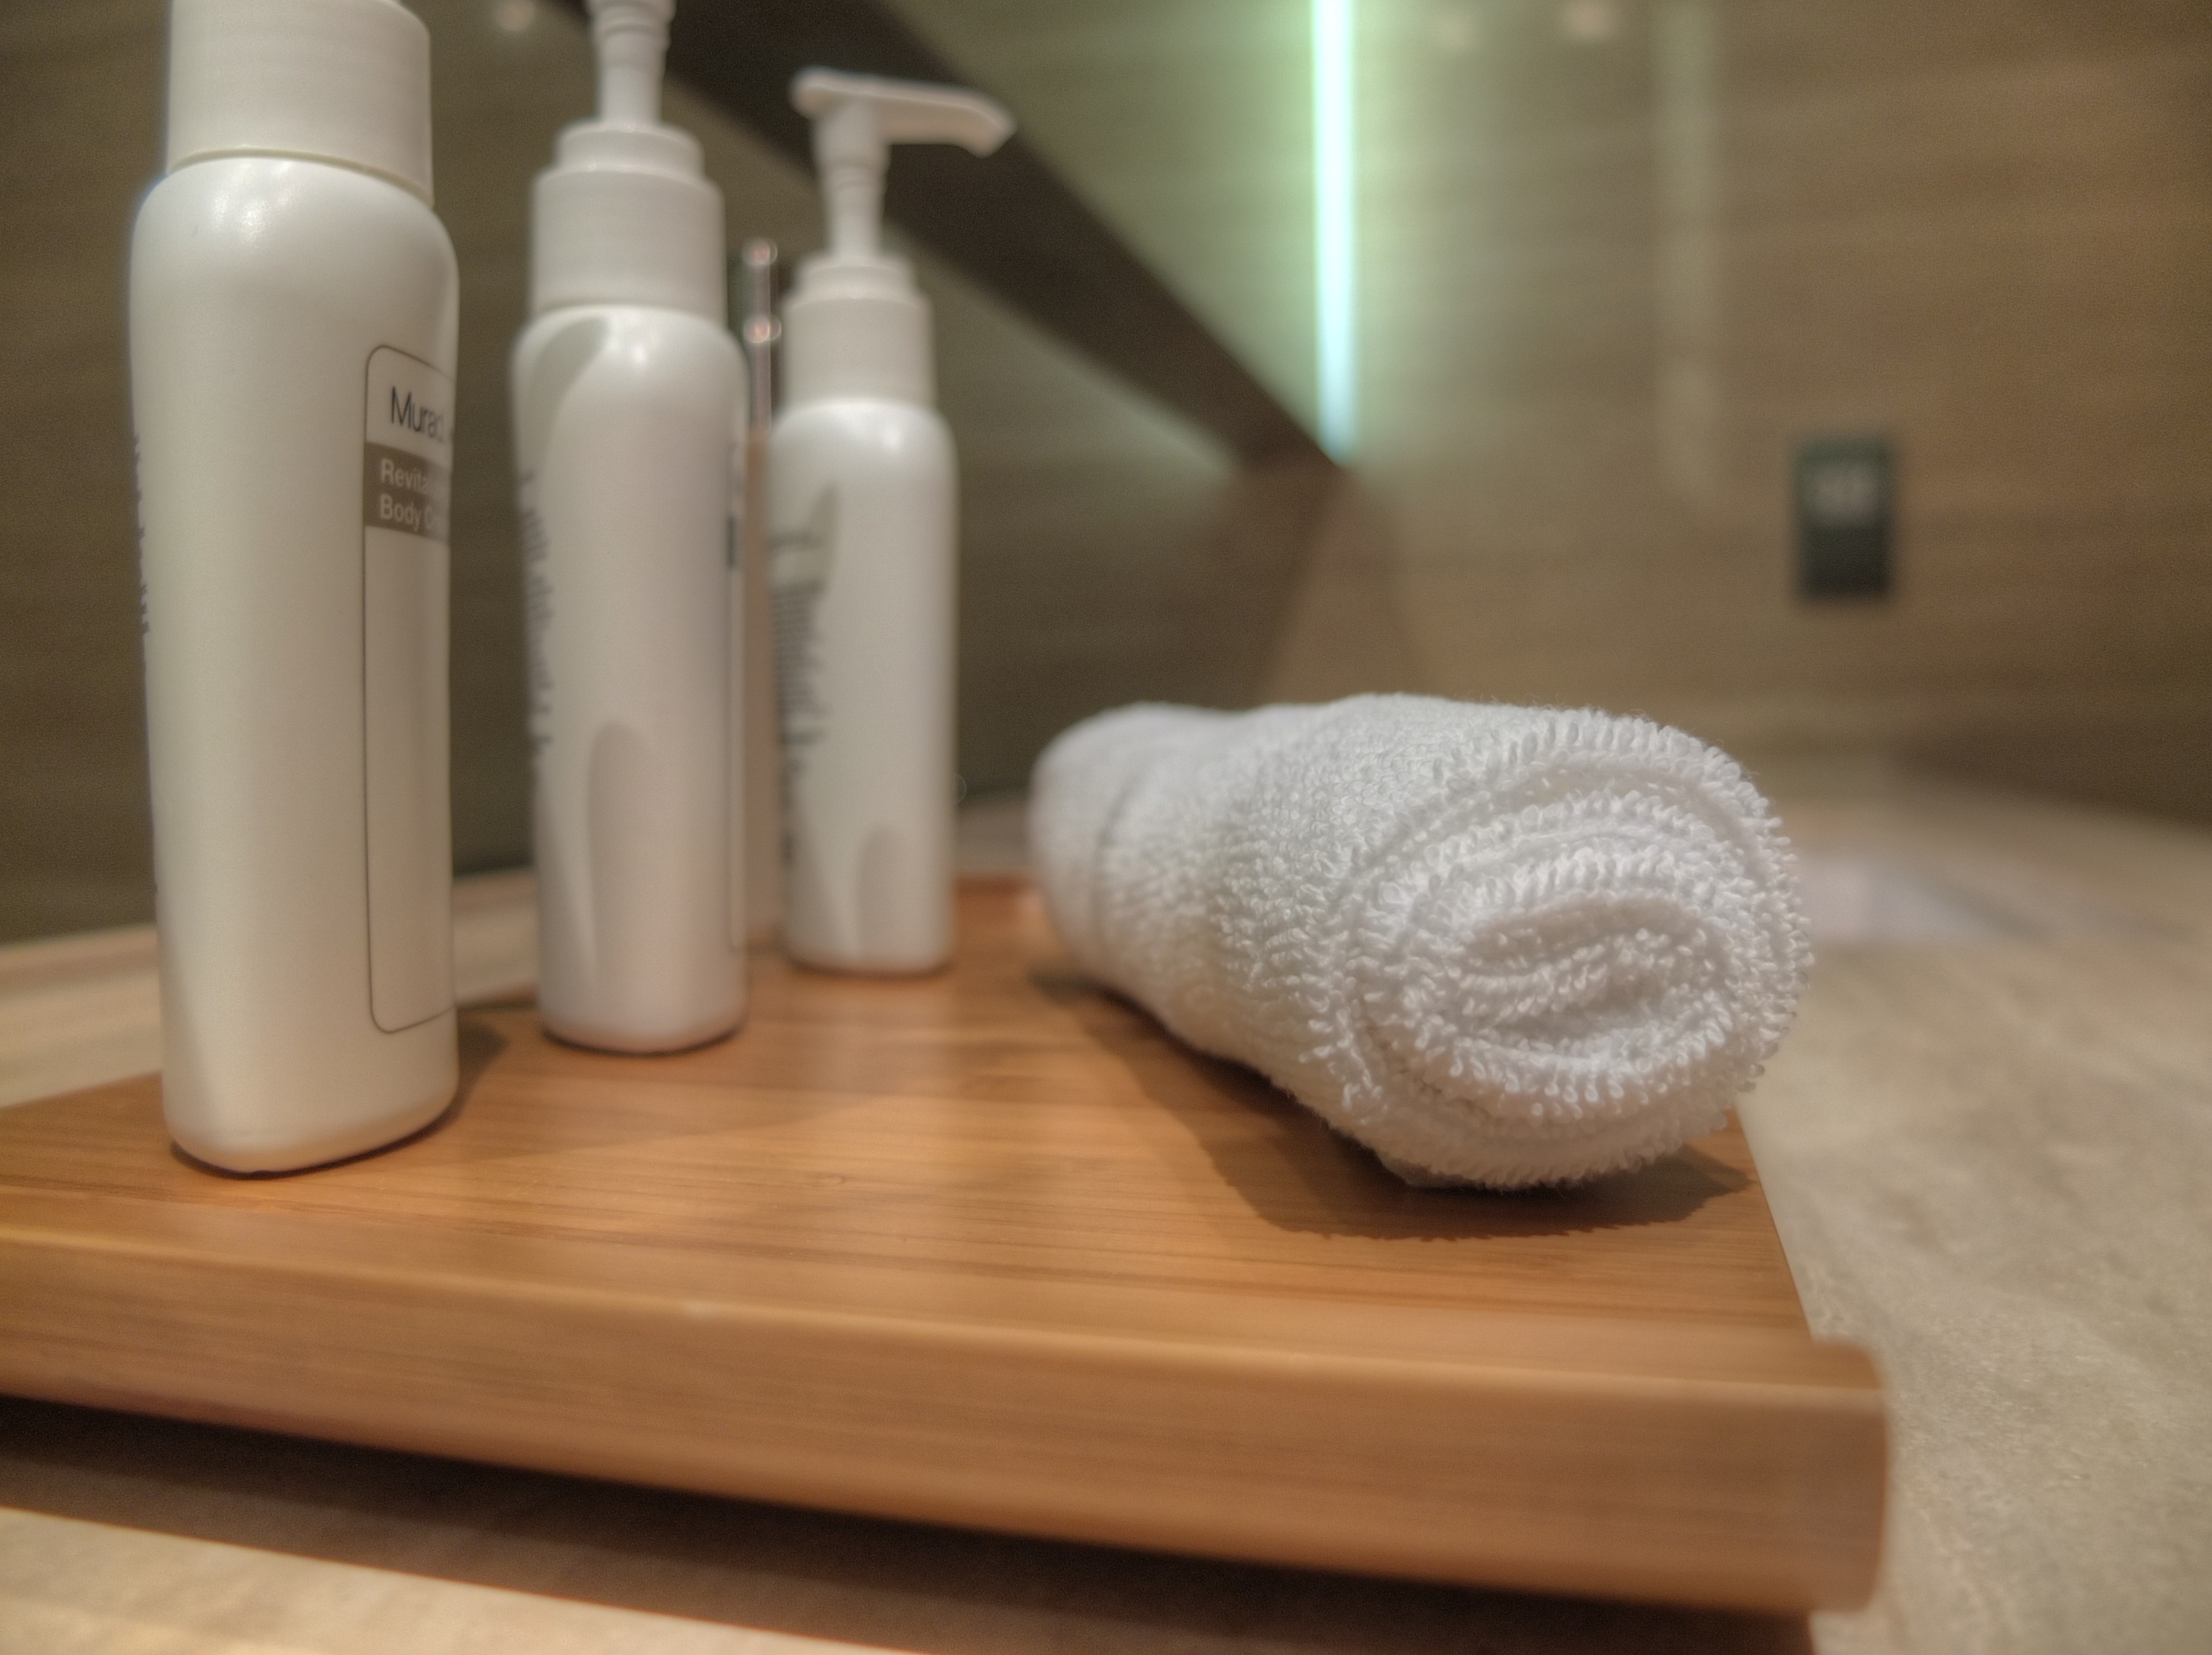 a white towel and bottles on a wooden surface